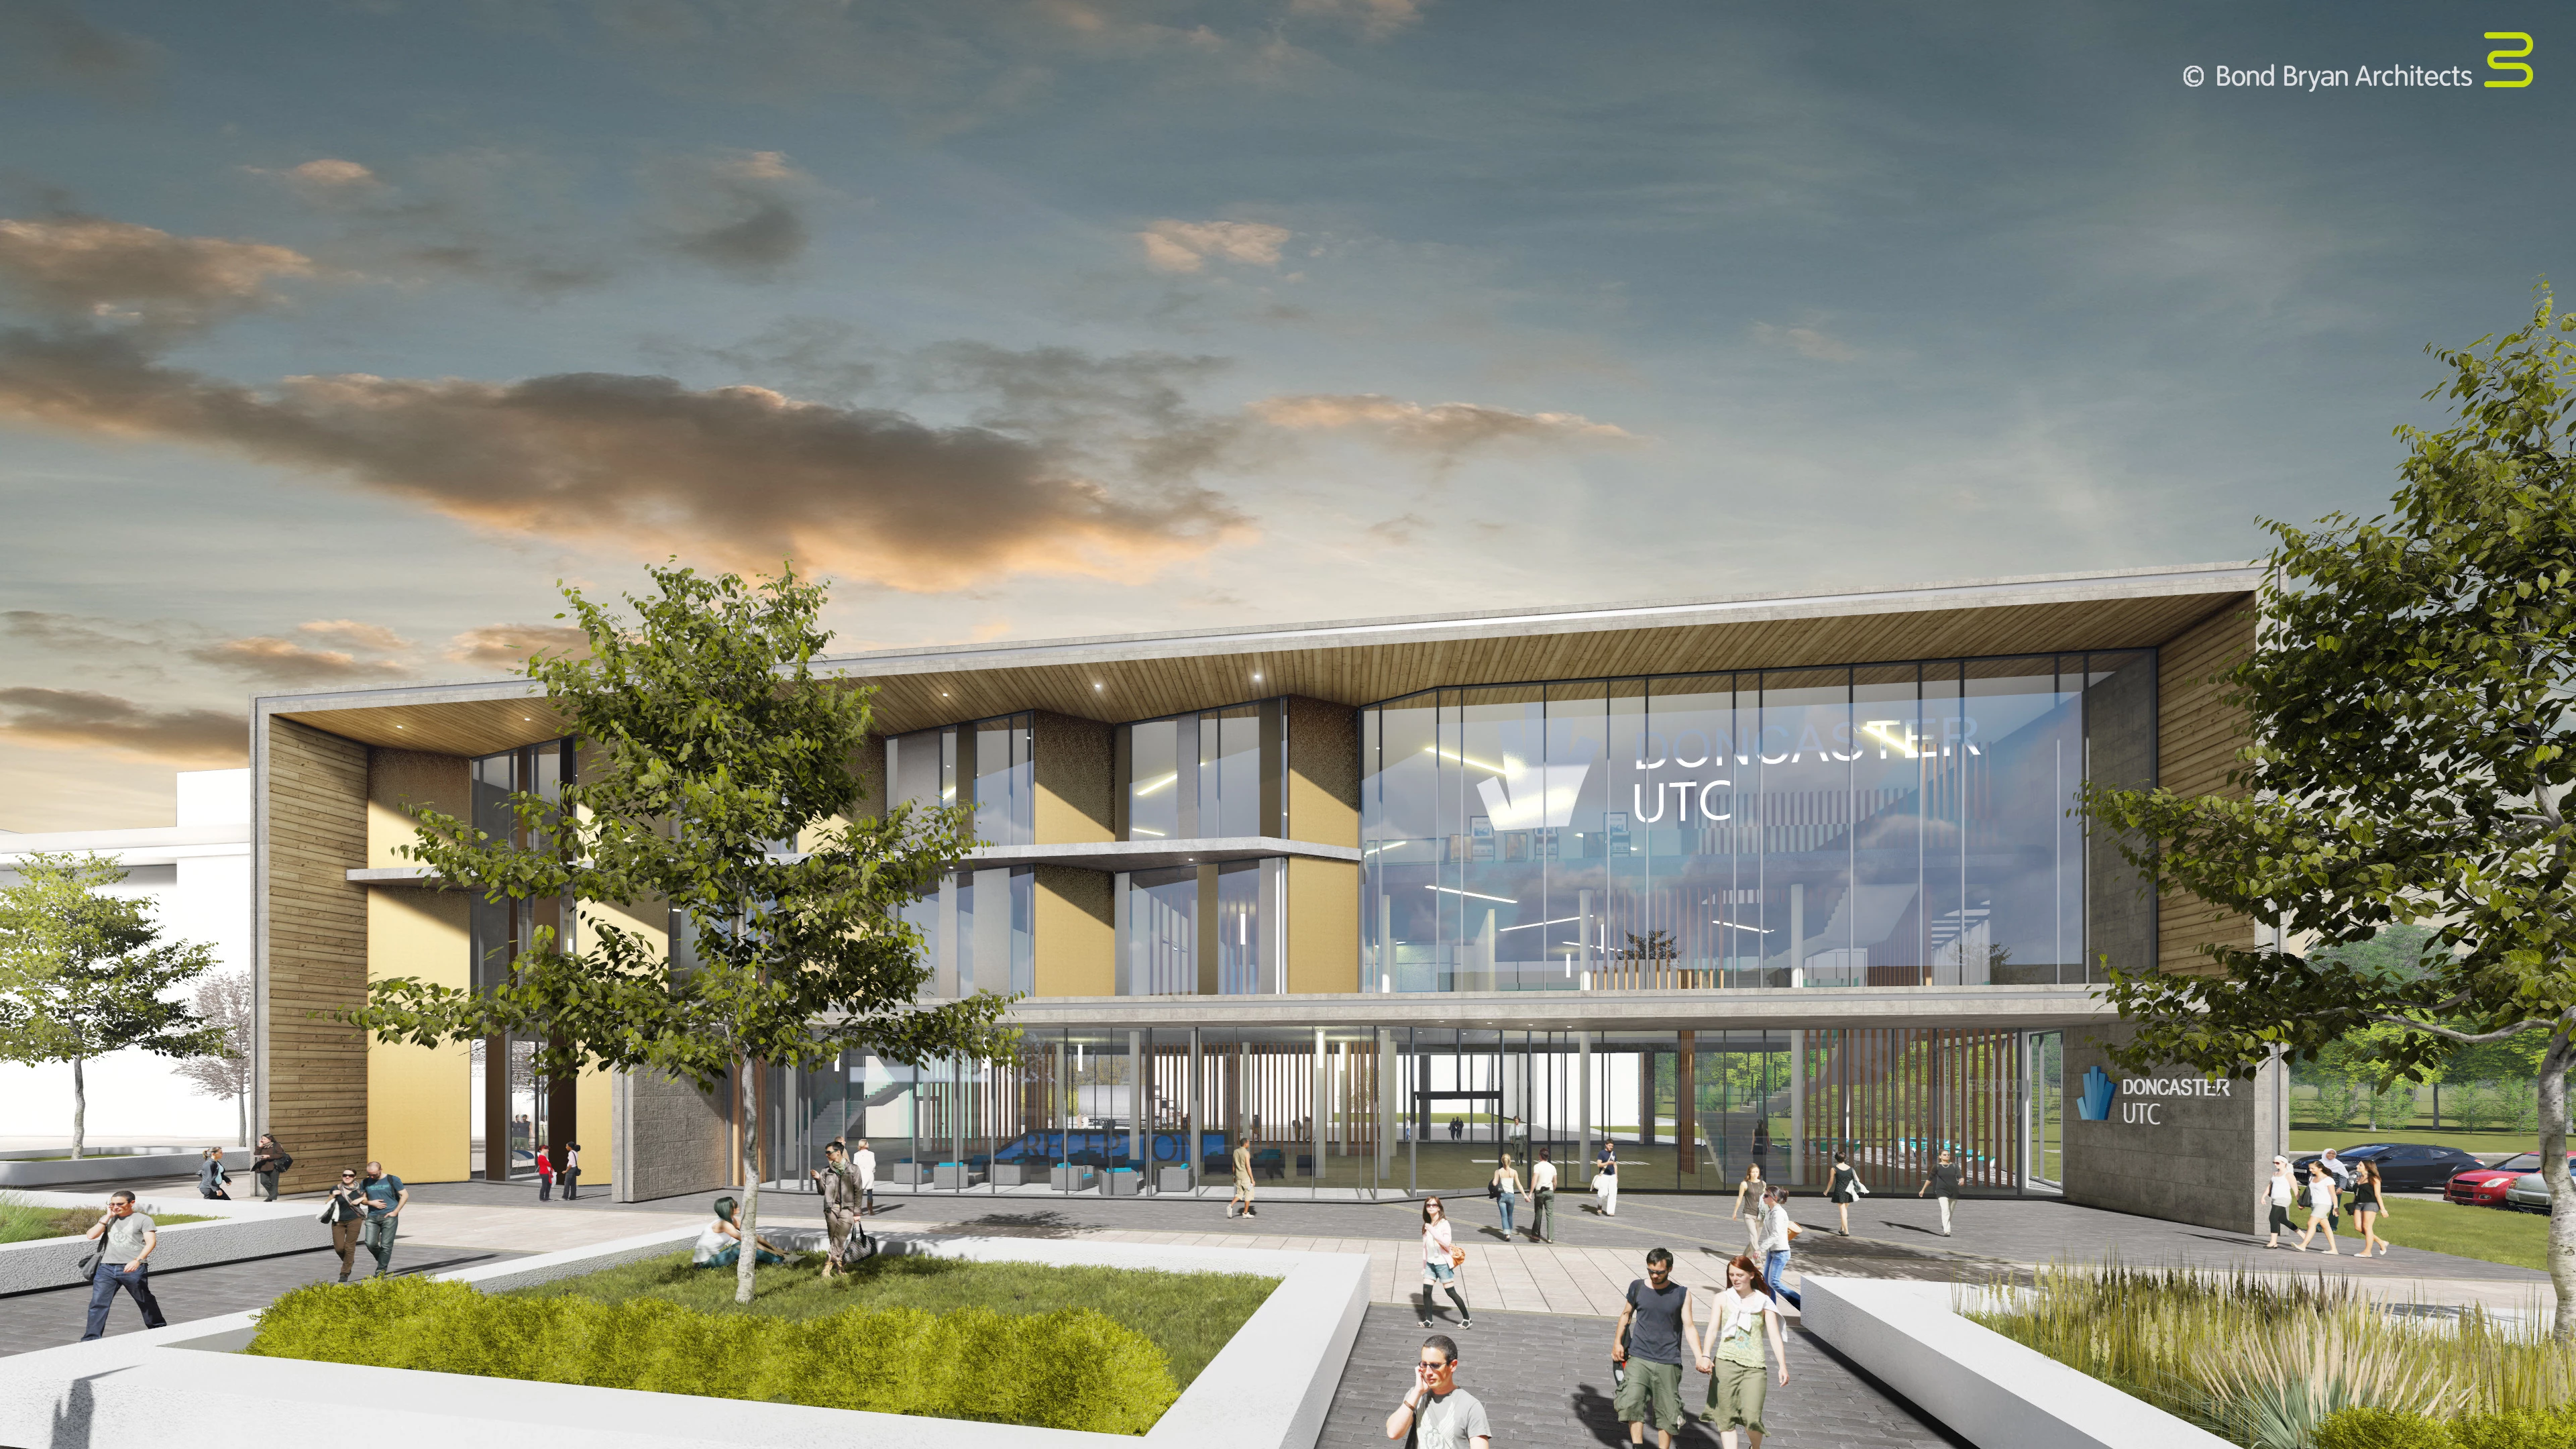 An artist's impression of the Doncaster UTC building